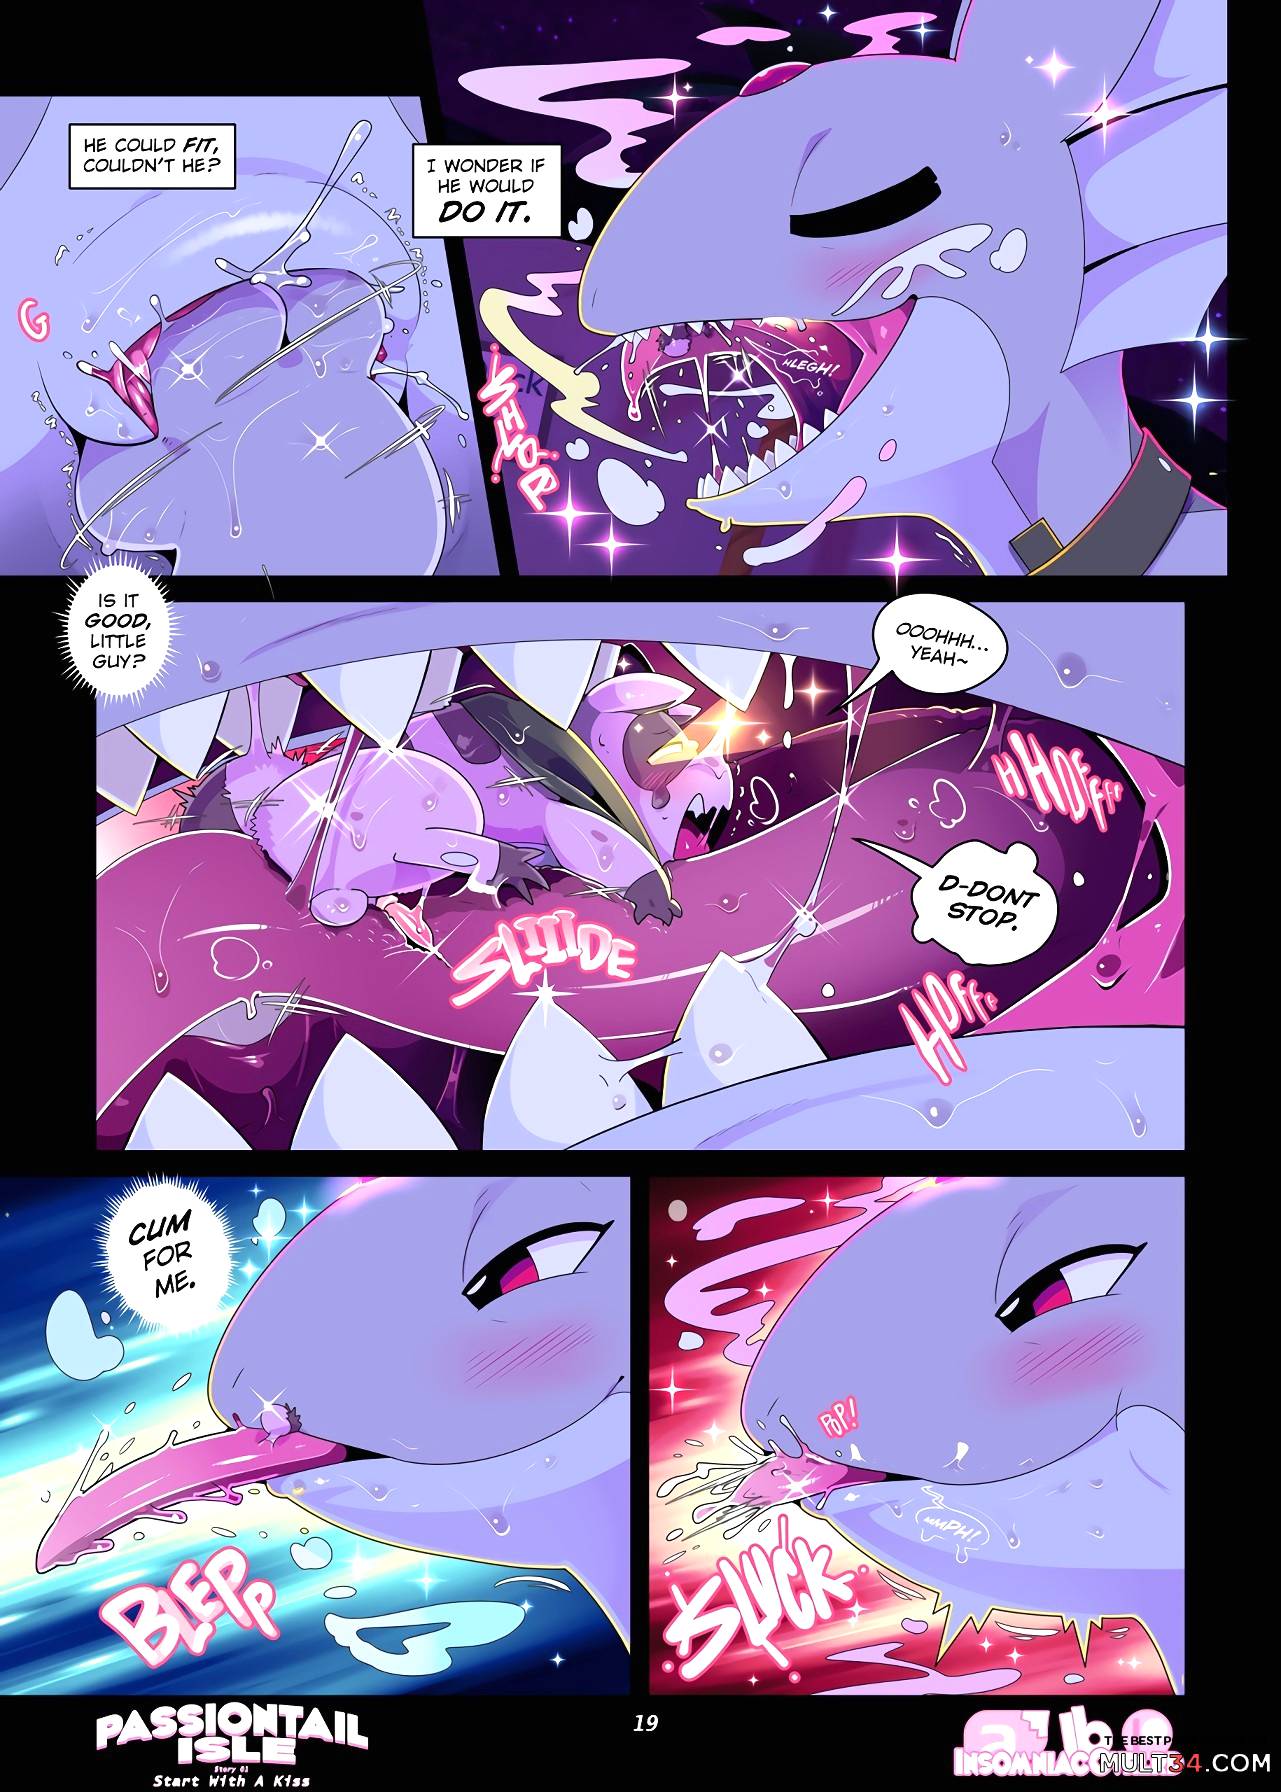 Passiontail Isle by Insomniacovrlrd page 20